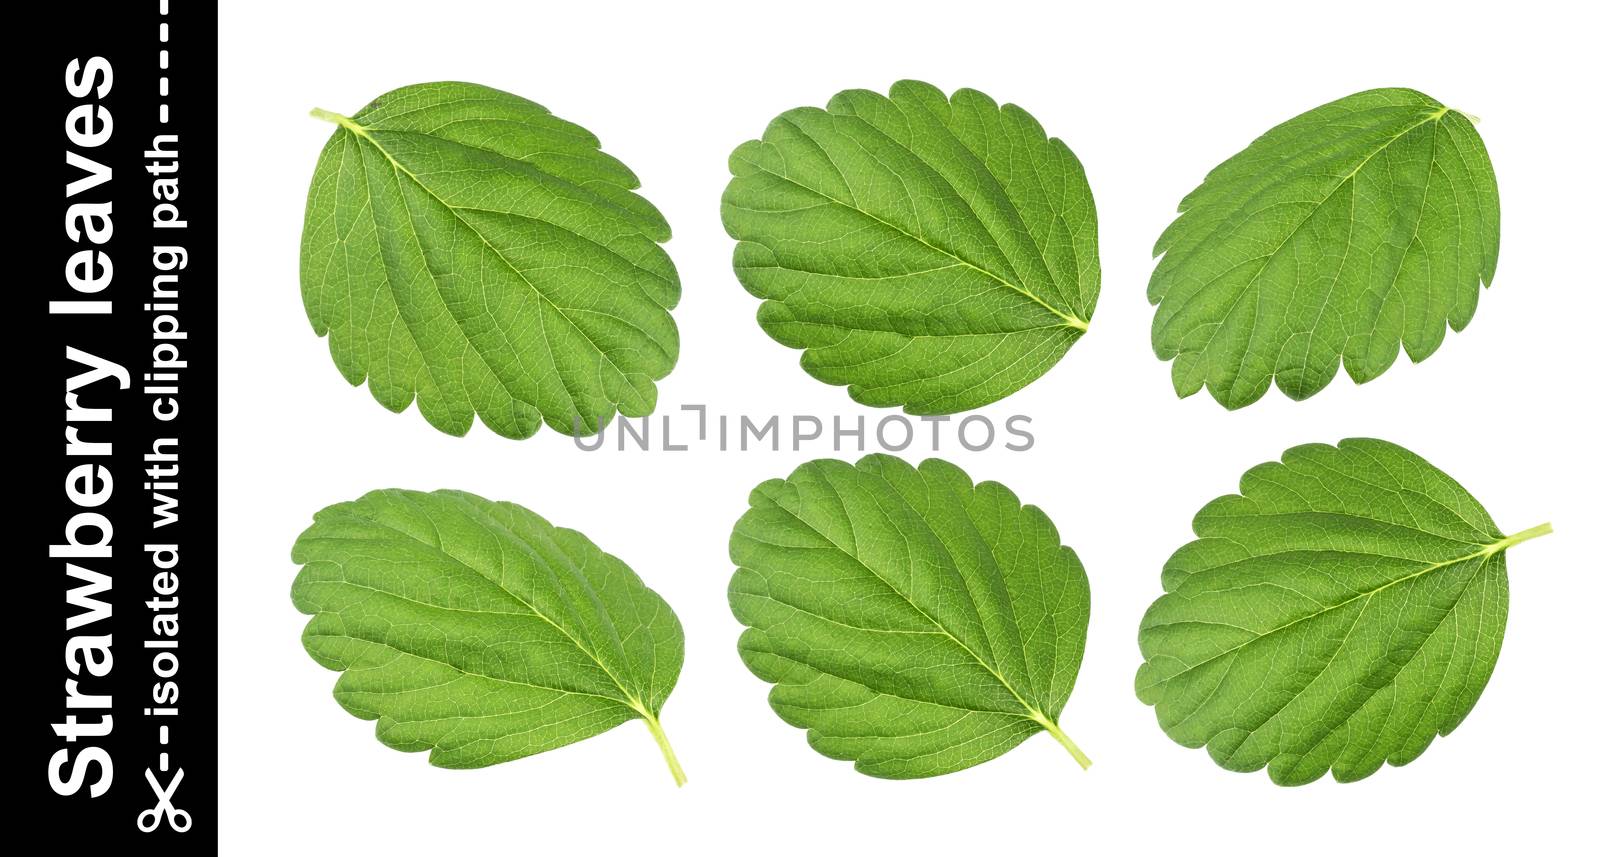 Strawberry leaves isolated on white background with clipping path by xamtiw